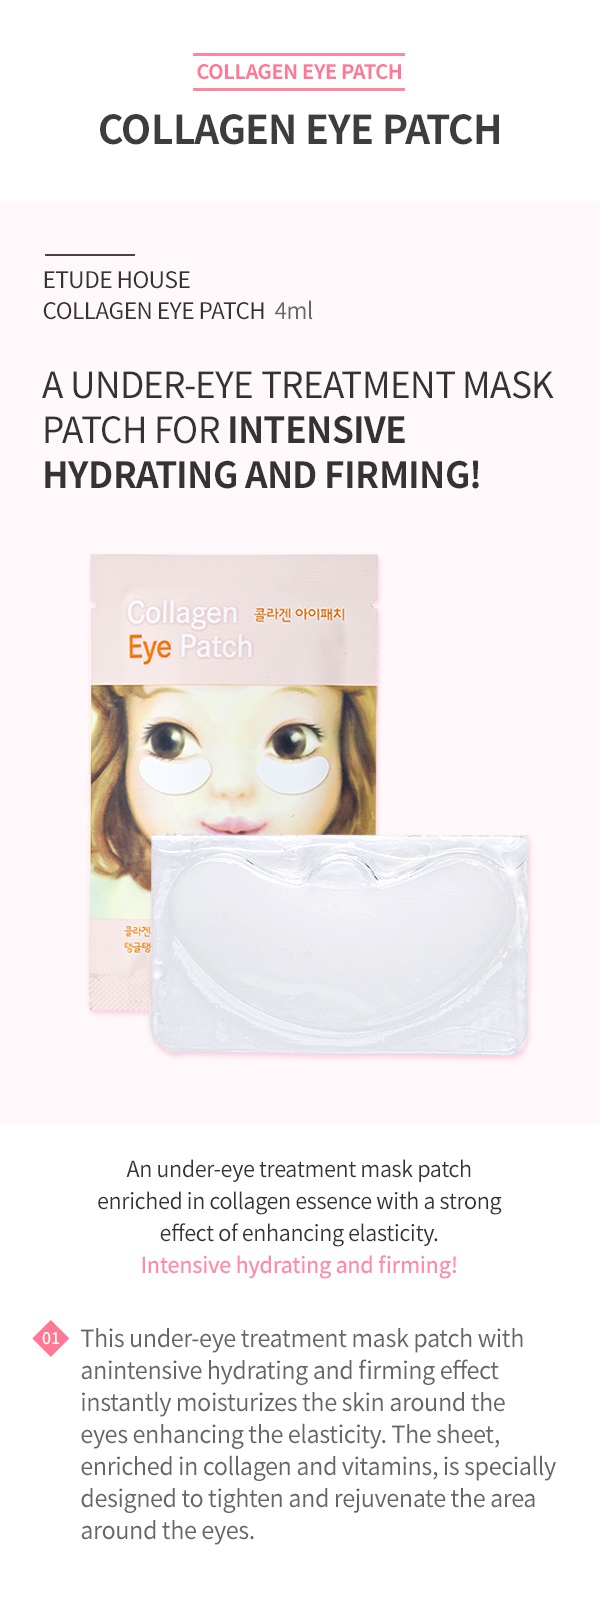 Collagen Eye Patch AD from shopandshop